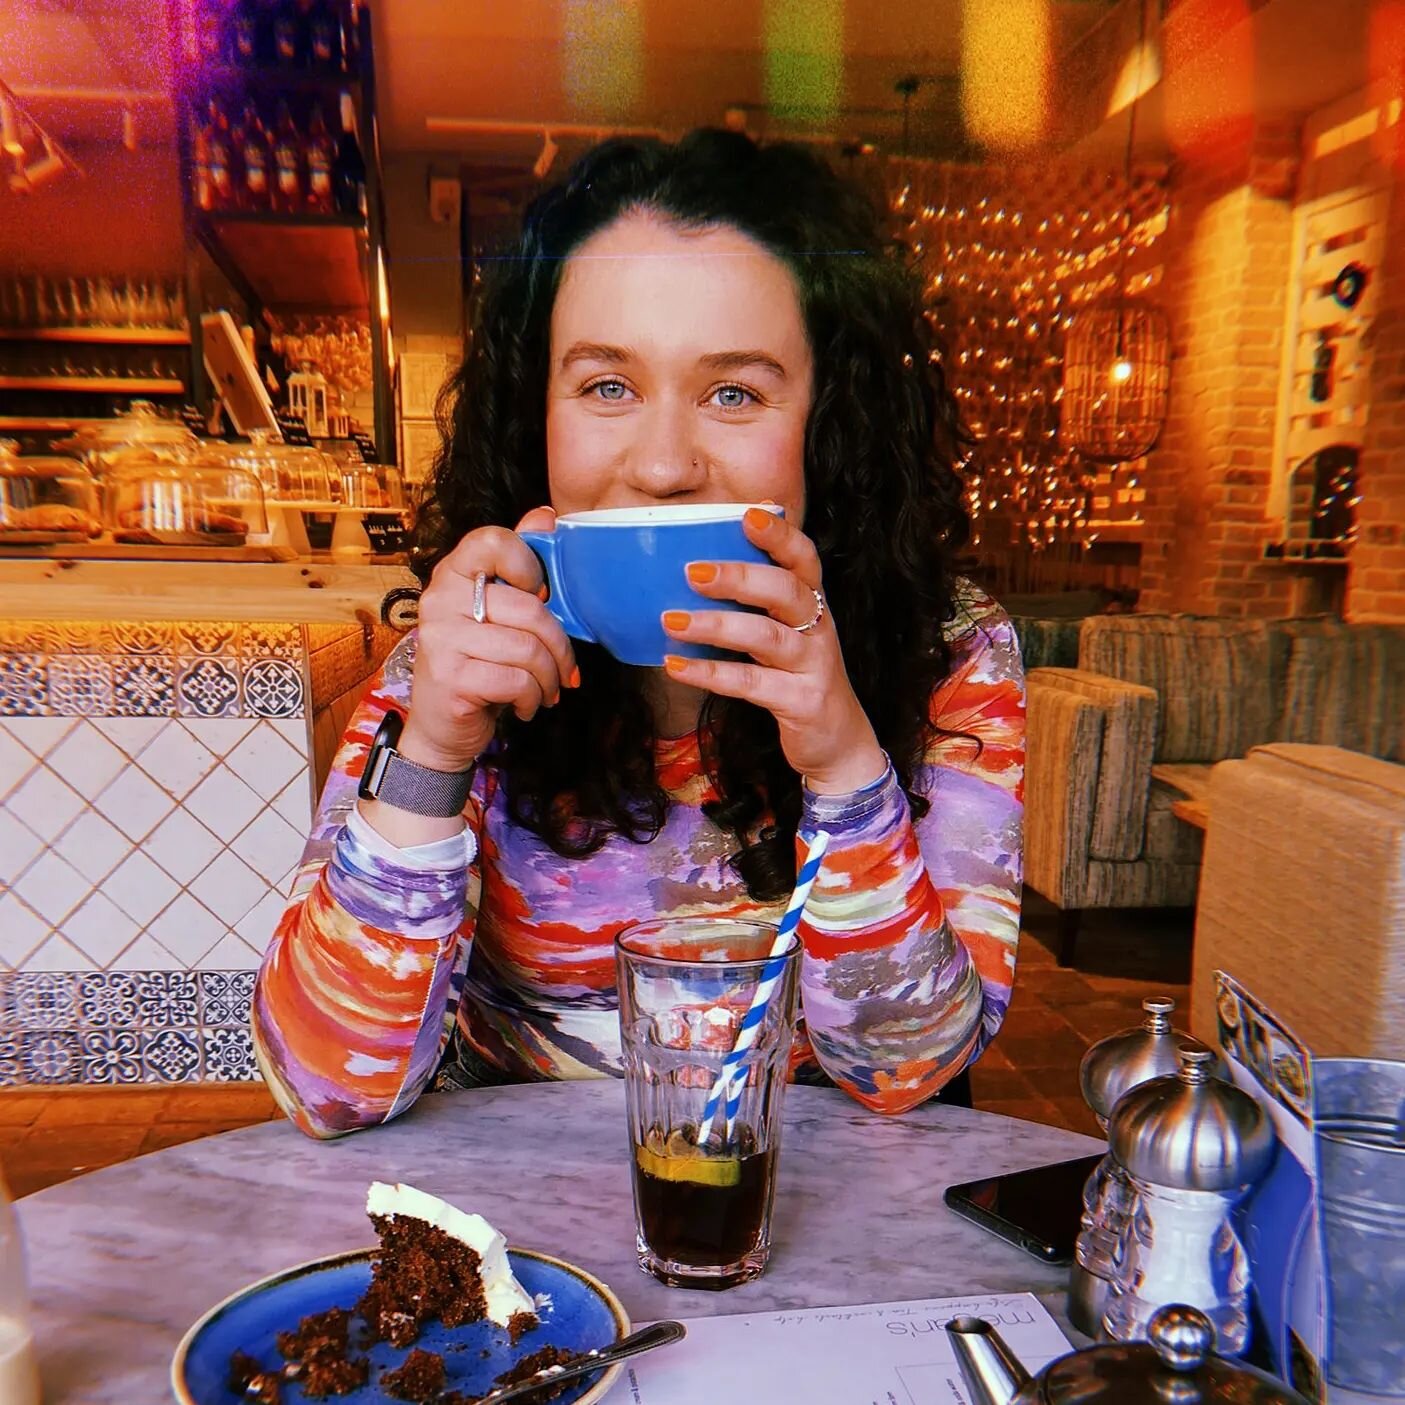 My life : ✨ colour, curls, coffee, (diet) coke, cheesy grins and cake ✨ #livecolourfully